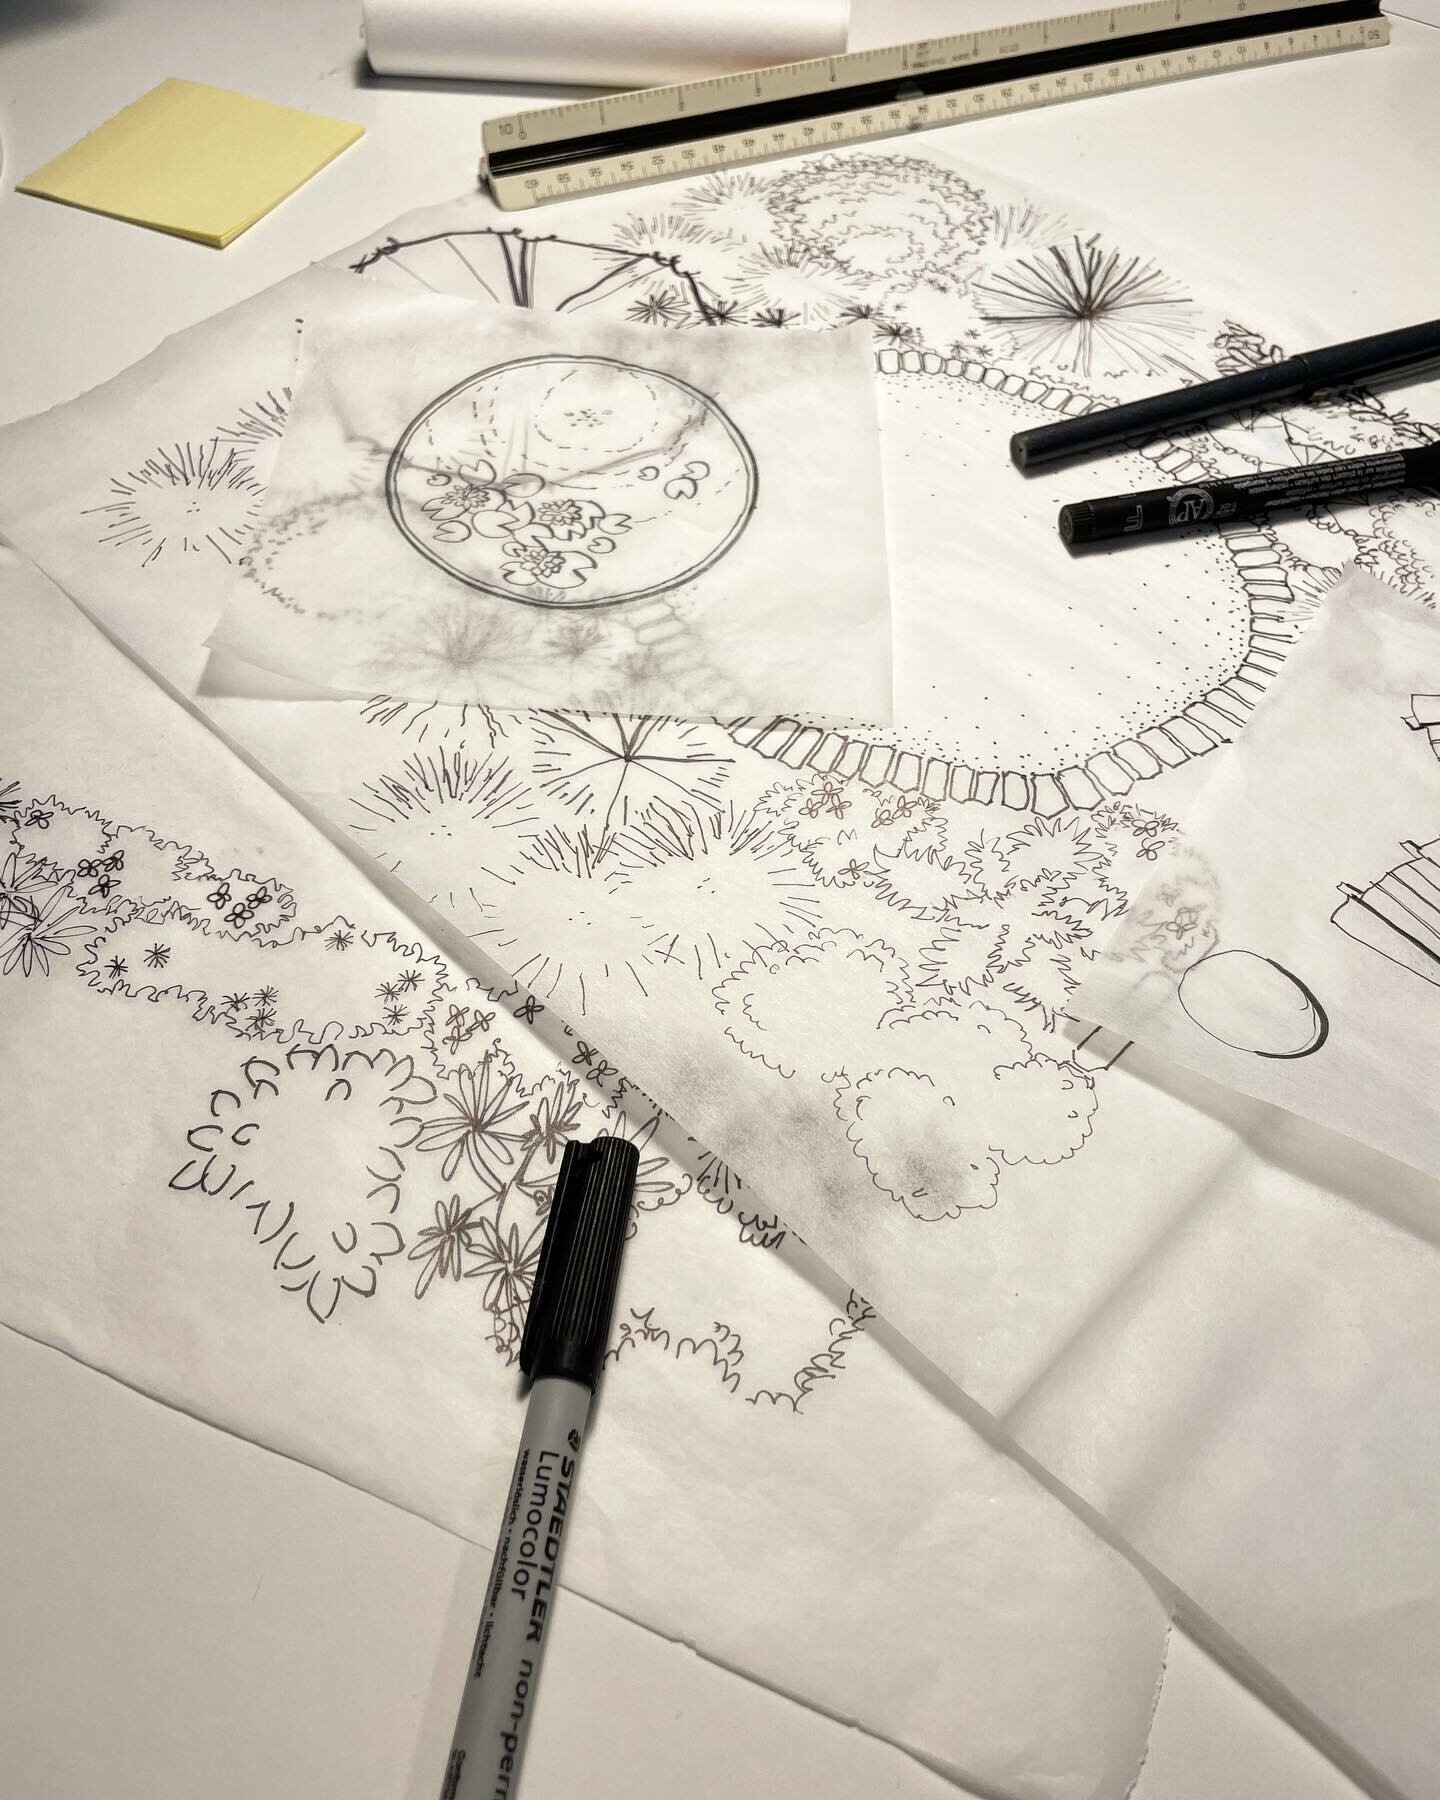 🌧️ Rainy days are great for plants, and for sketch sessions! 🌧️ 🌱 

#handdrawing 
#landscapedesign 
#atxlandscape 
#rainydaysketch